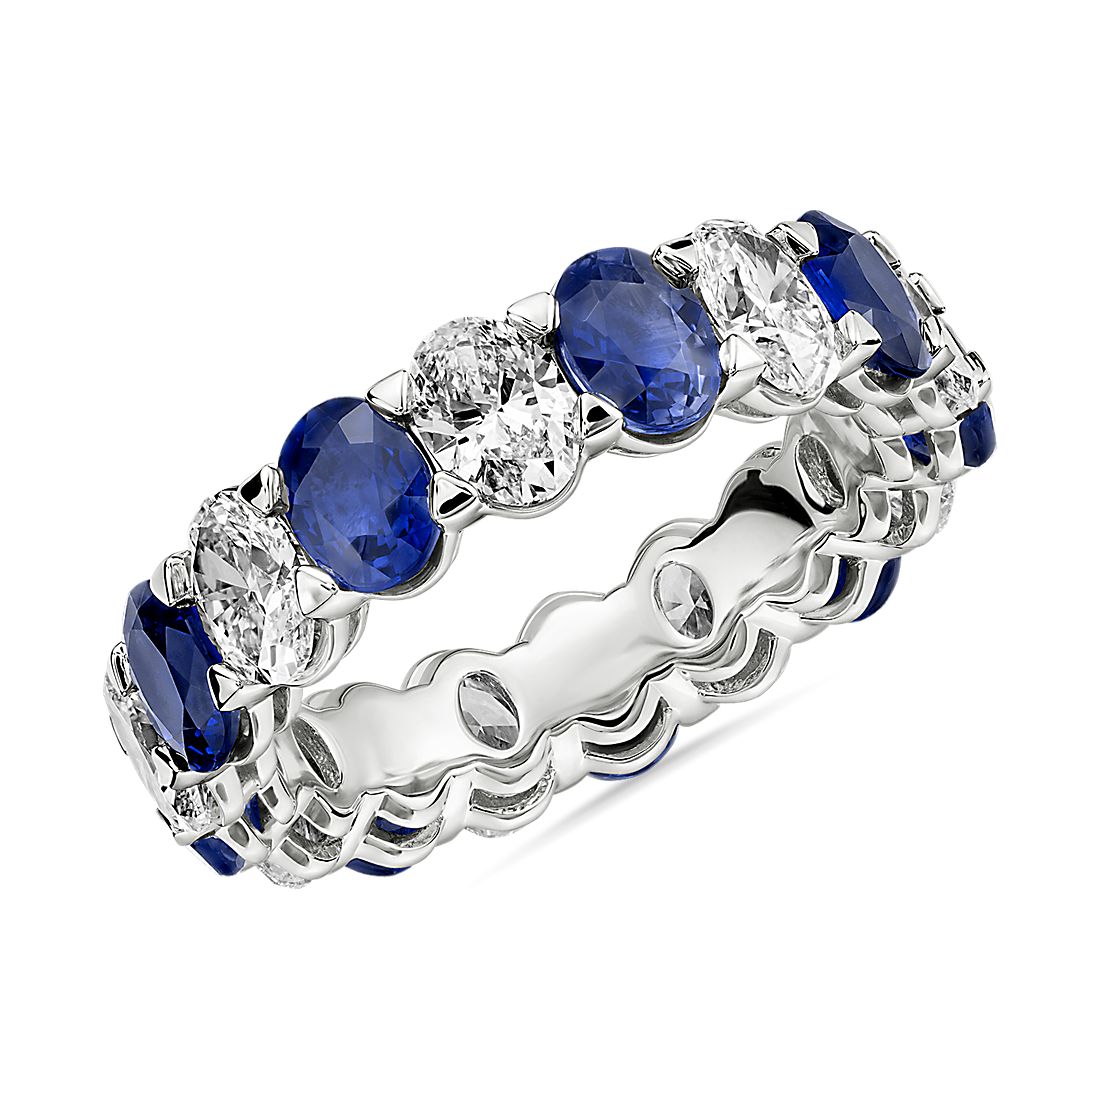 Blue Nile Studio Seamless Sapphire and Diamond Oval-Cut Eternity Band in Platinum- G/VS2 (2 1/2 ct. tw.)